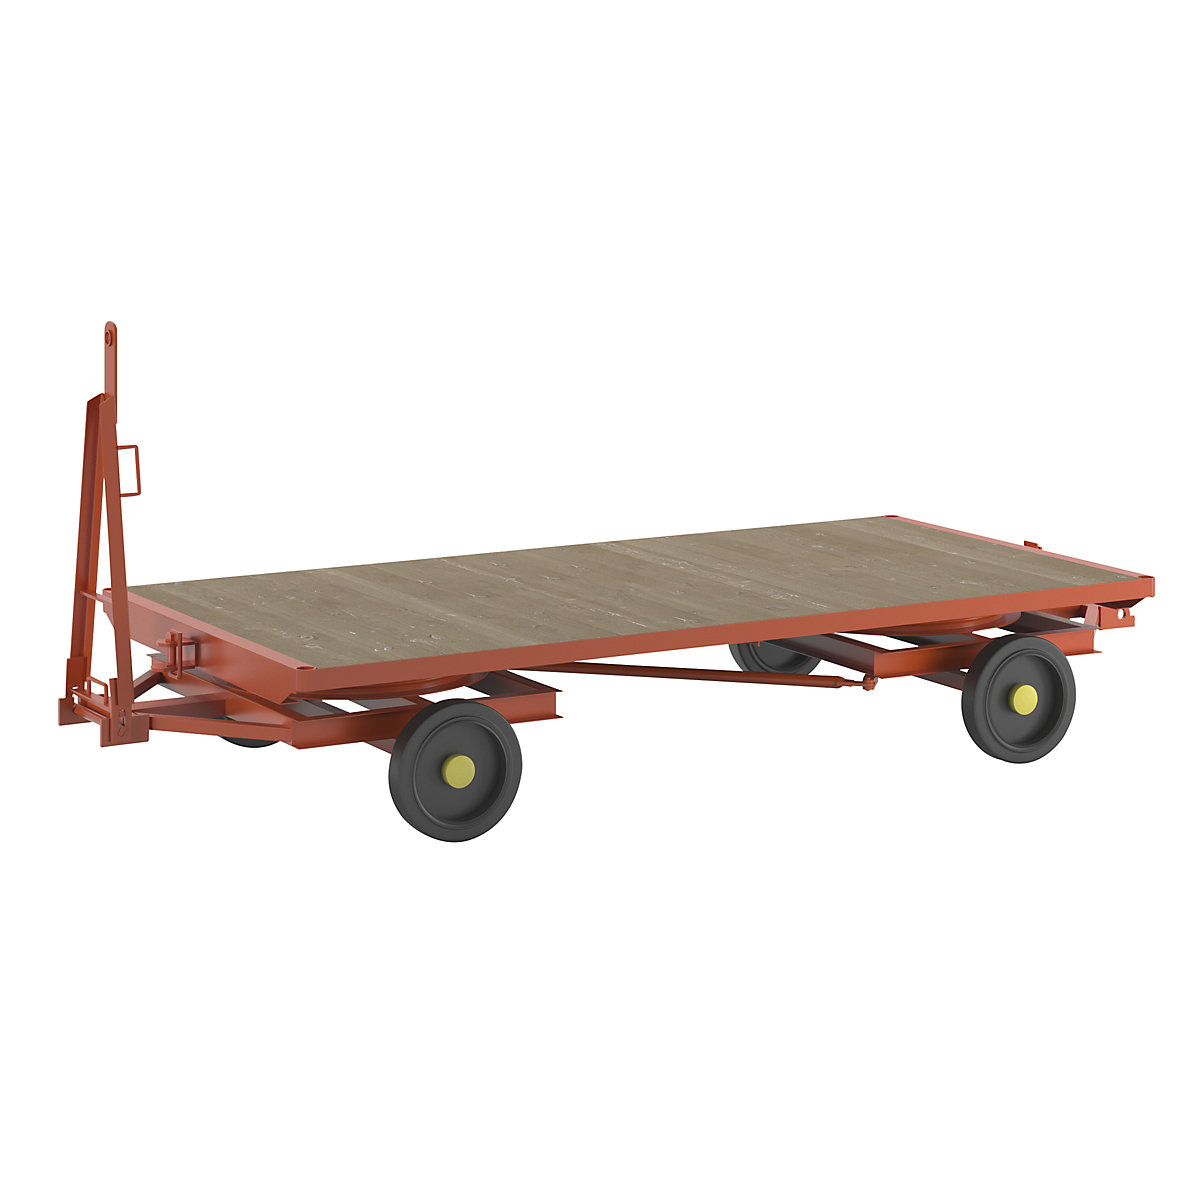 Trailer, 4-wheel double turntable steering, max. load 3 t, platform 3.0 x 1.5 m, solid rubber tyres-4